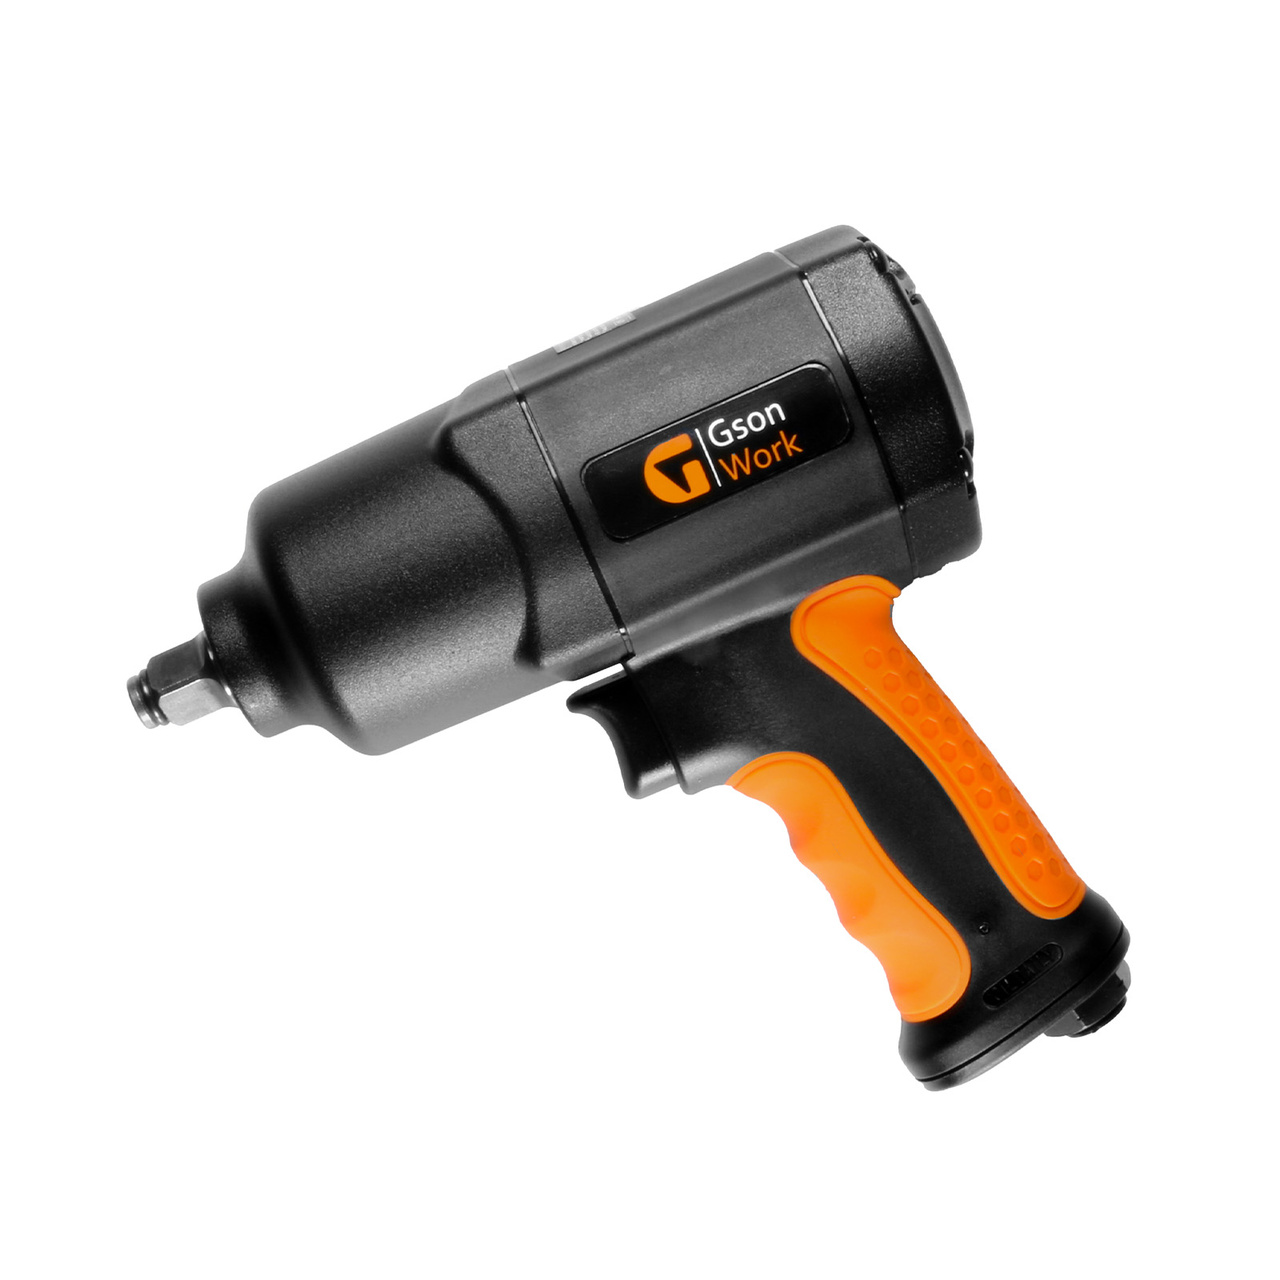 Composite Air Impact Wrench 1/2"